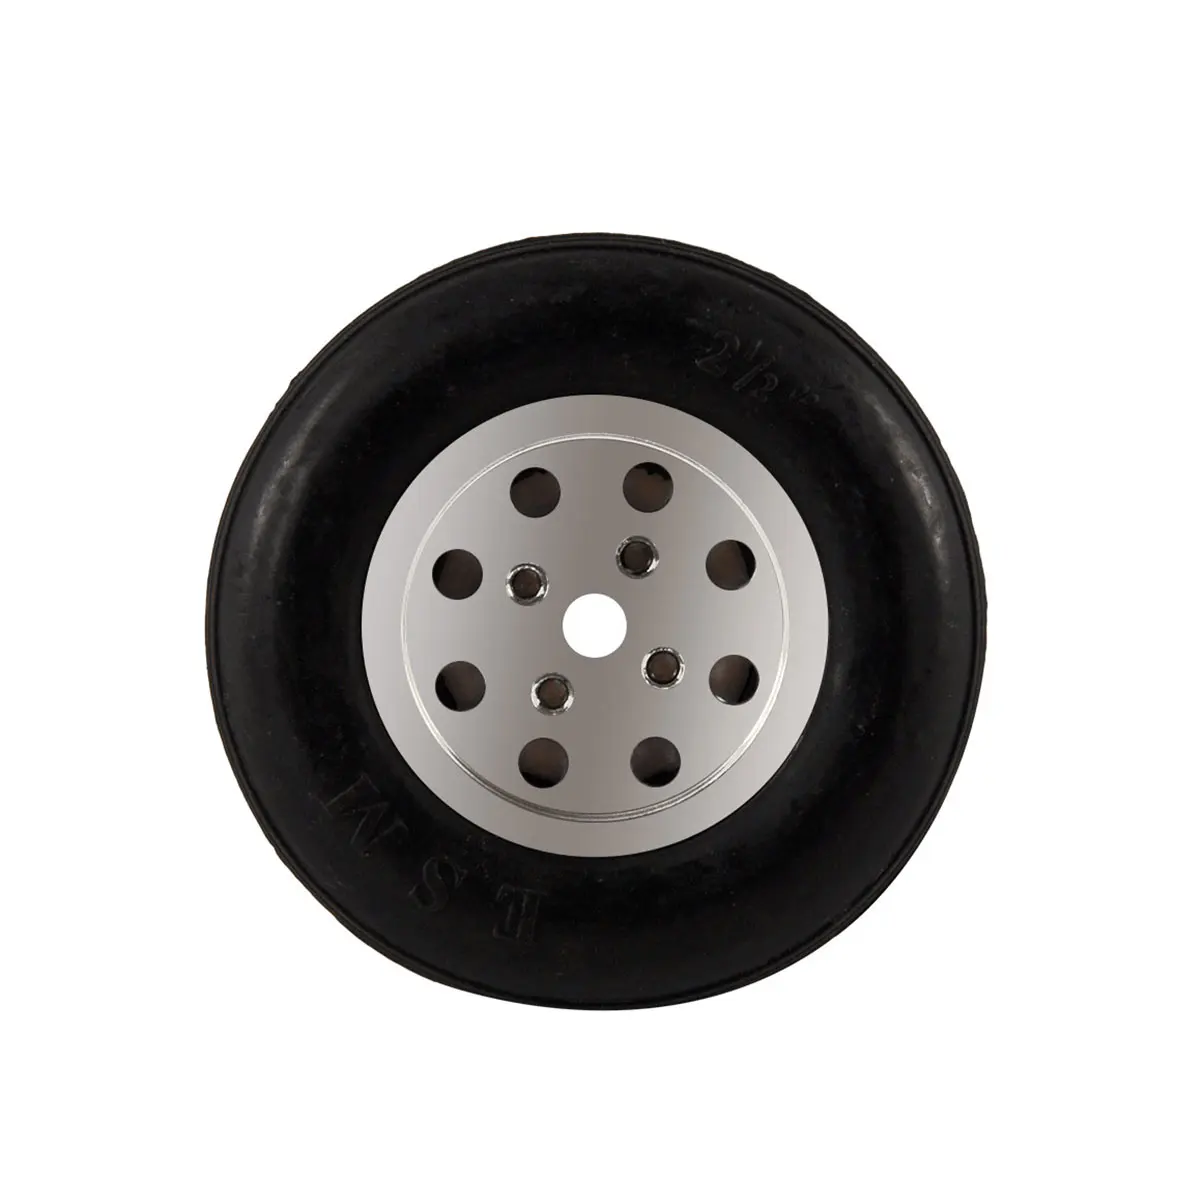 1Pair High Quality Rubber Wheels Tire With Aluminum Hub 1.75" / 2.5"/ 2.75/3" / 3.5" / 4" /4.5"/5'' Inch for RC Airplane Model images - 6